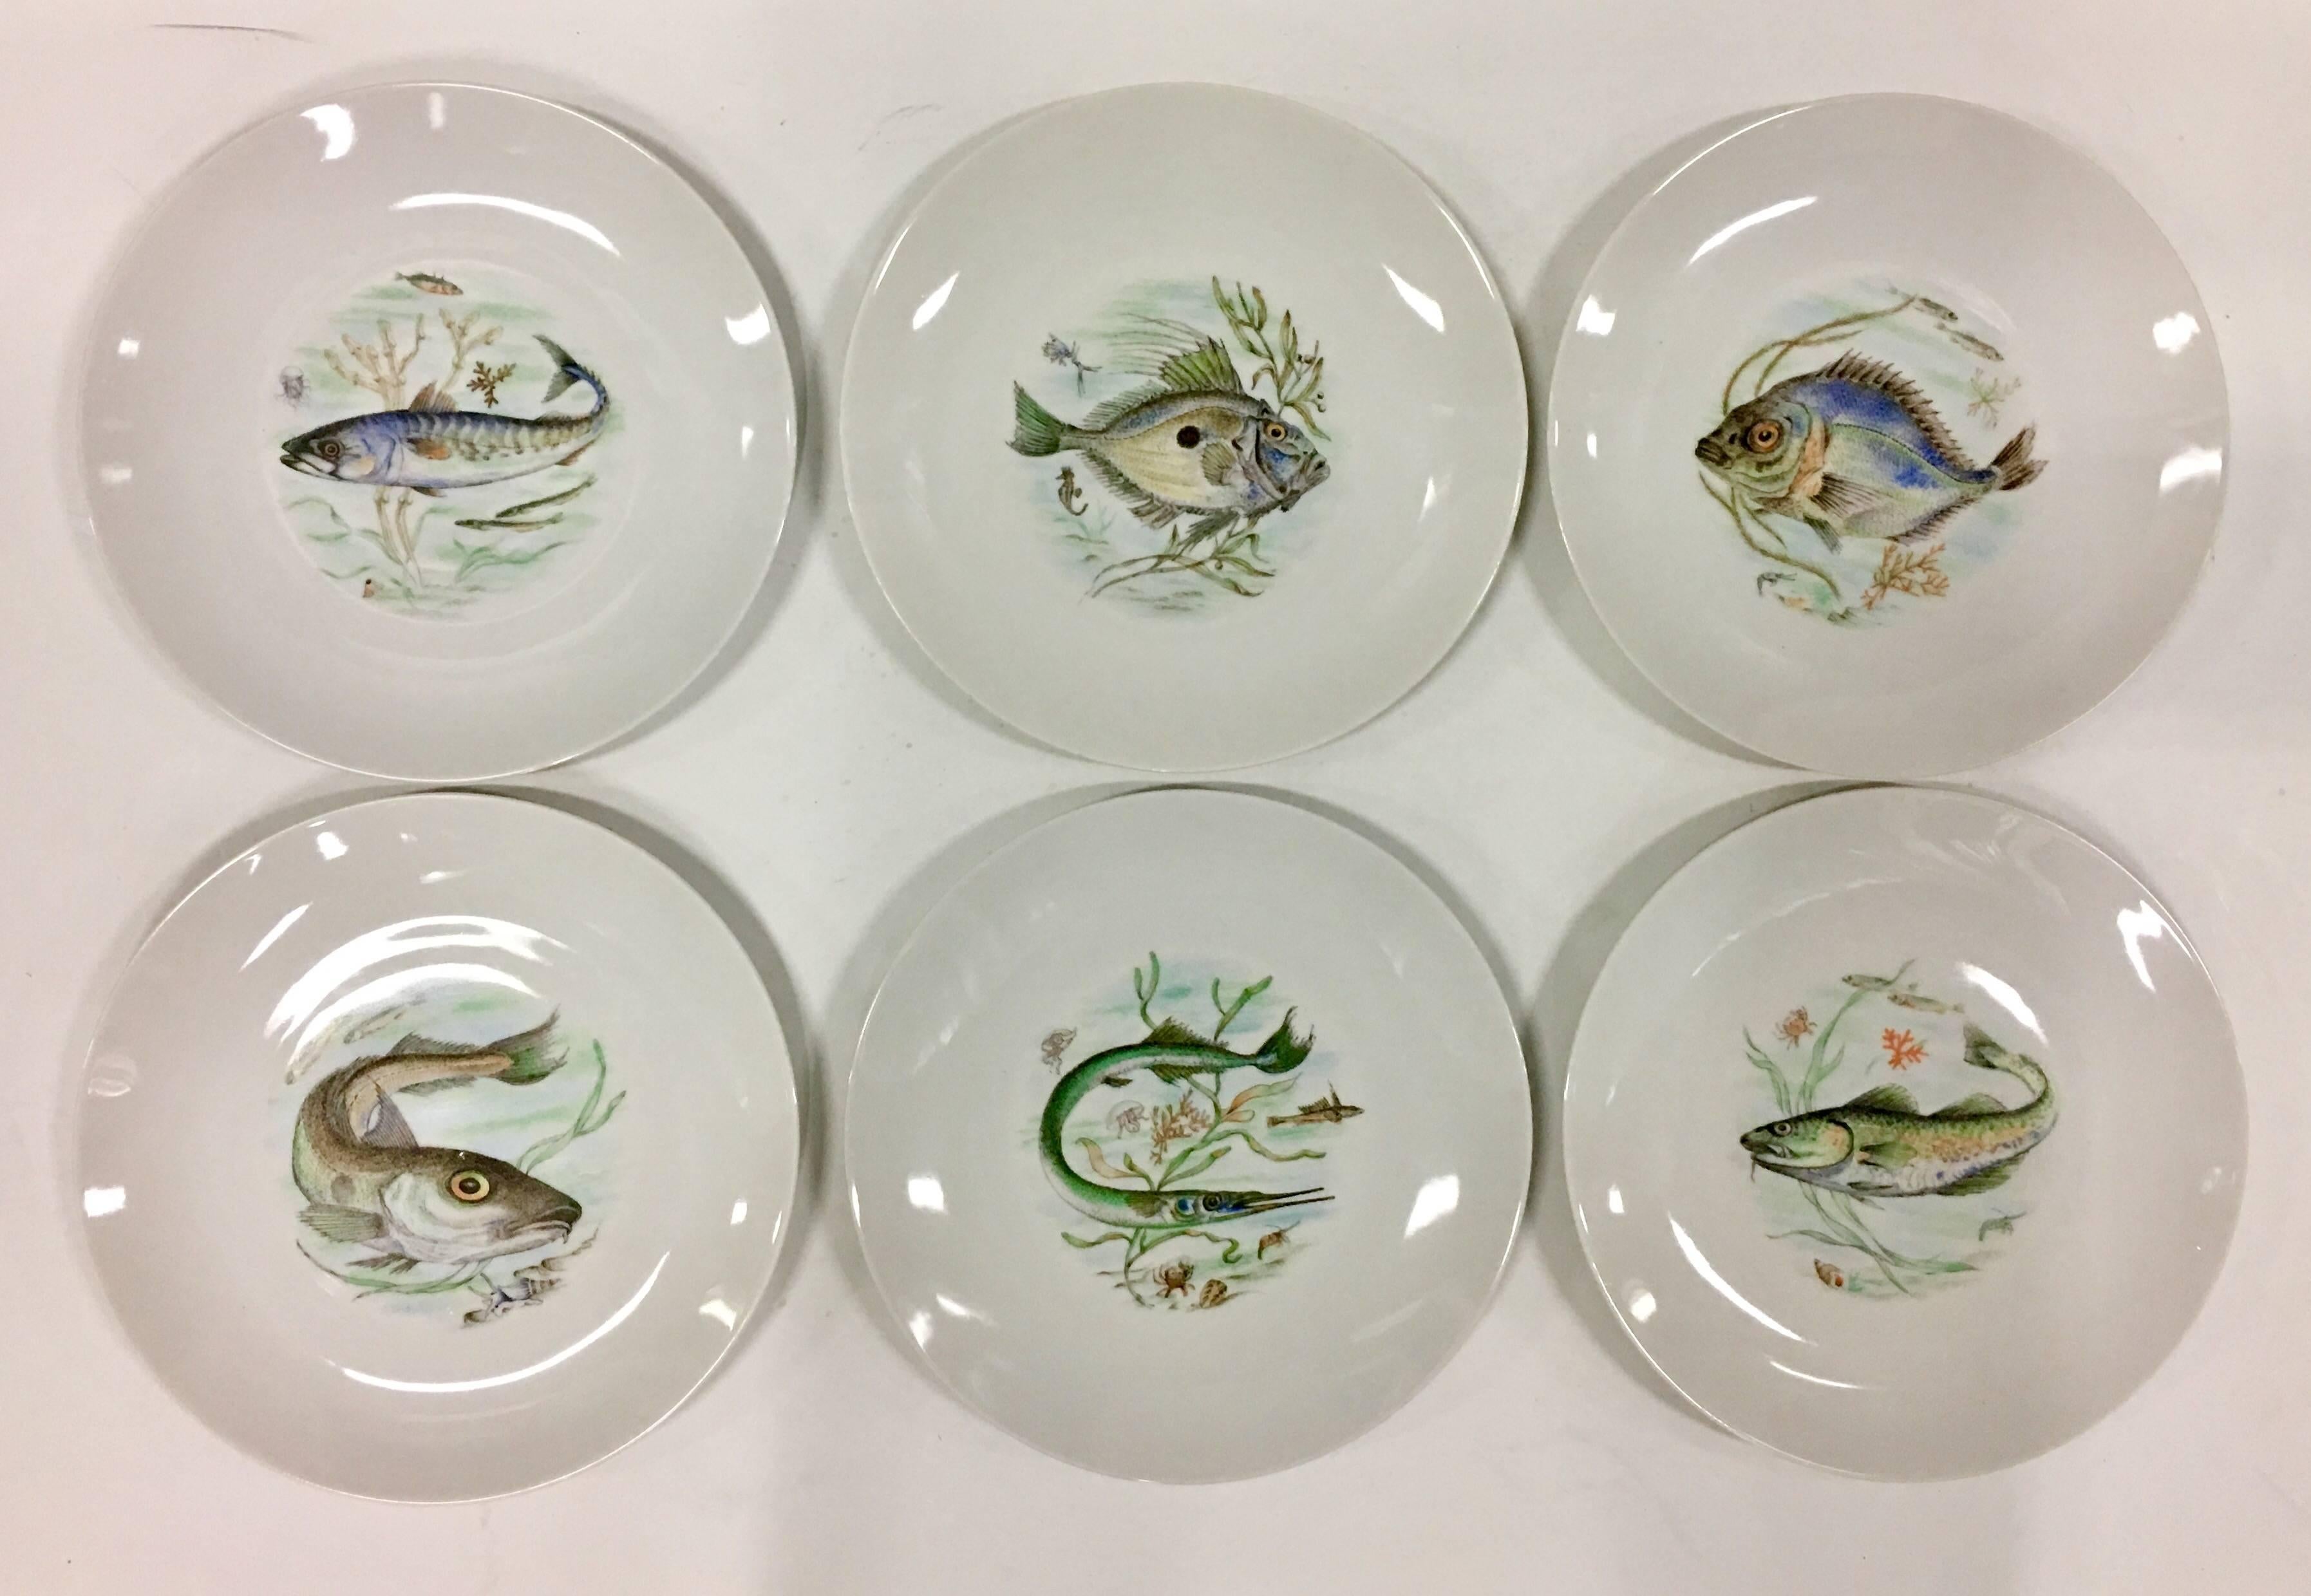 1930s German porcelain hand-painted fish service of seven pieces. Set includes six dinner plates and one large oval serving platter. Features a modern clean lined bright white ground with a pastel and earthy tone colorful sea life theme. Each piece